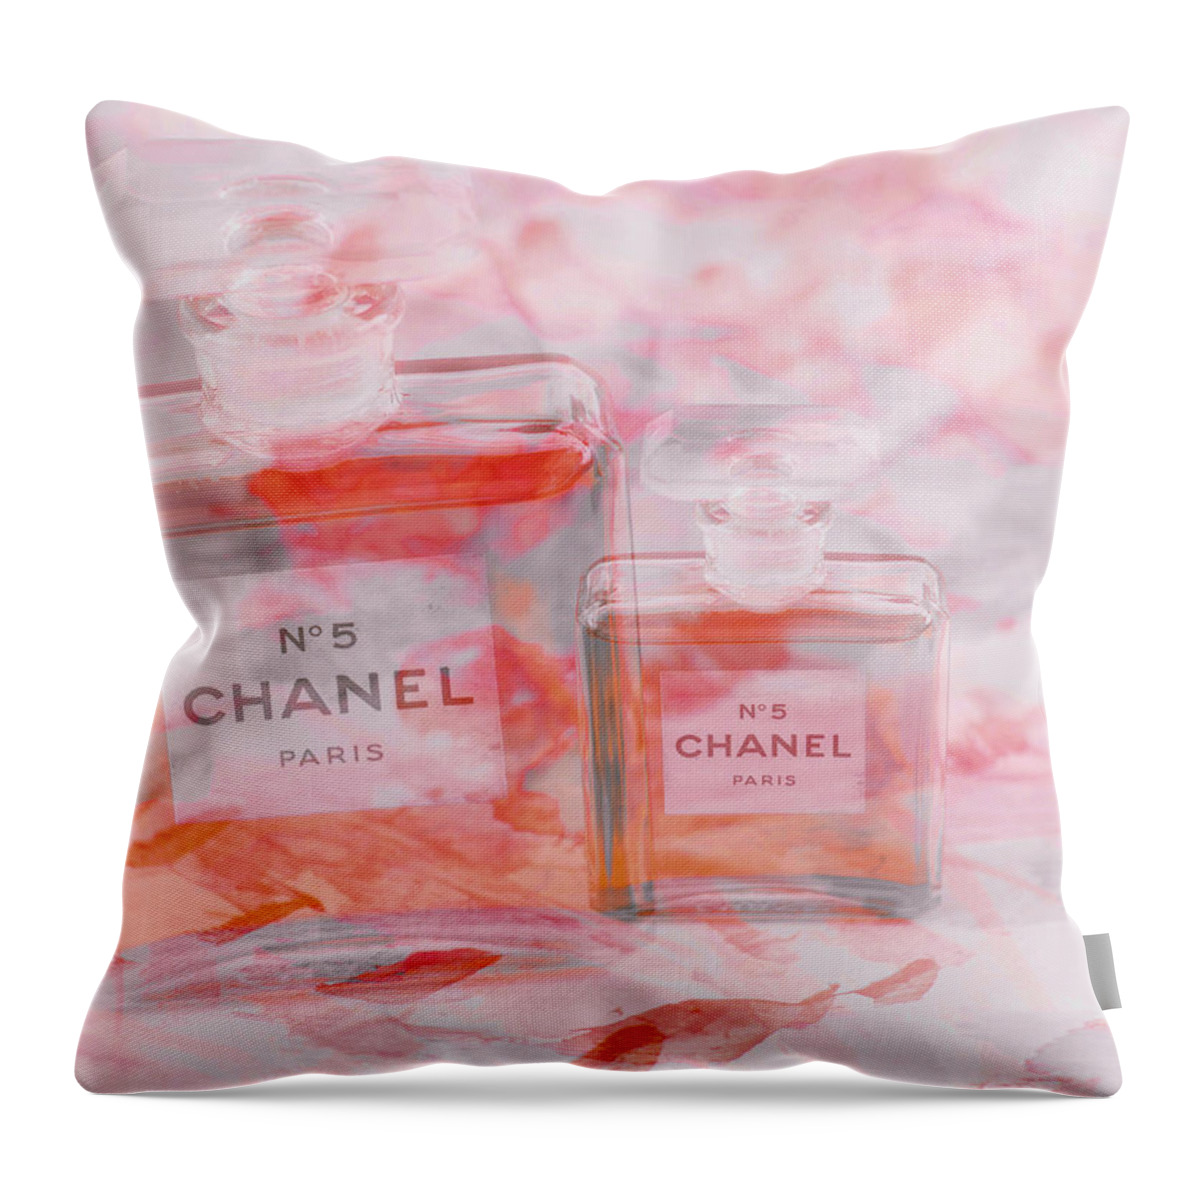 Chanel Abstract Throw Pillow